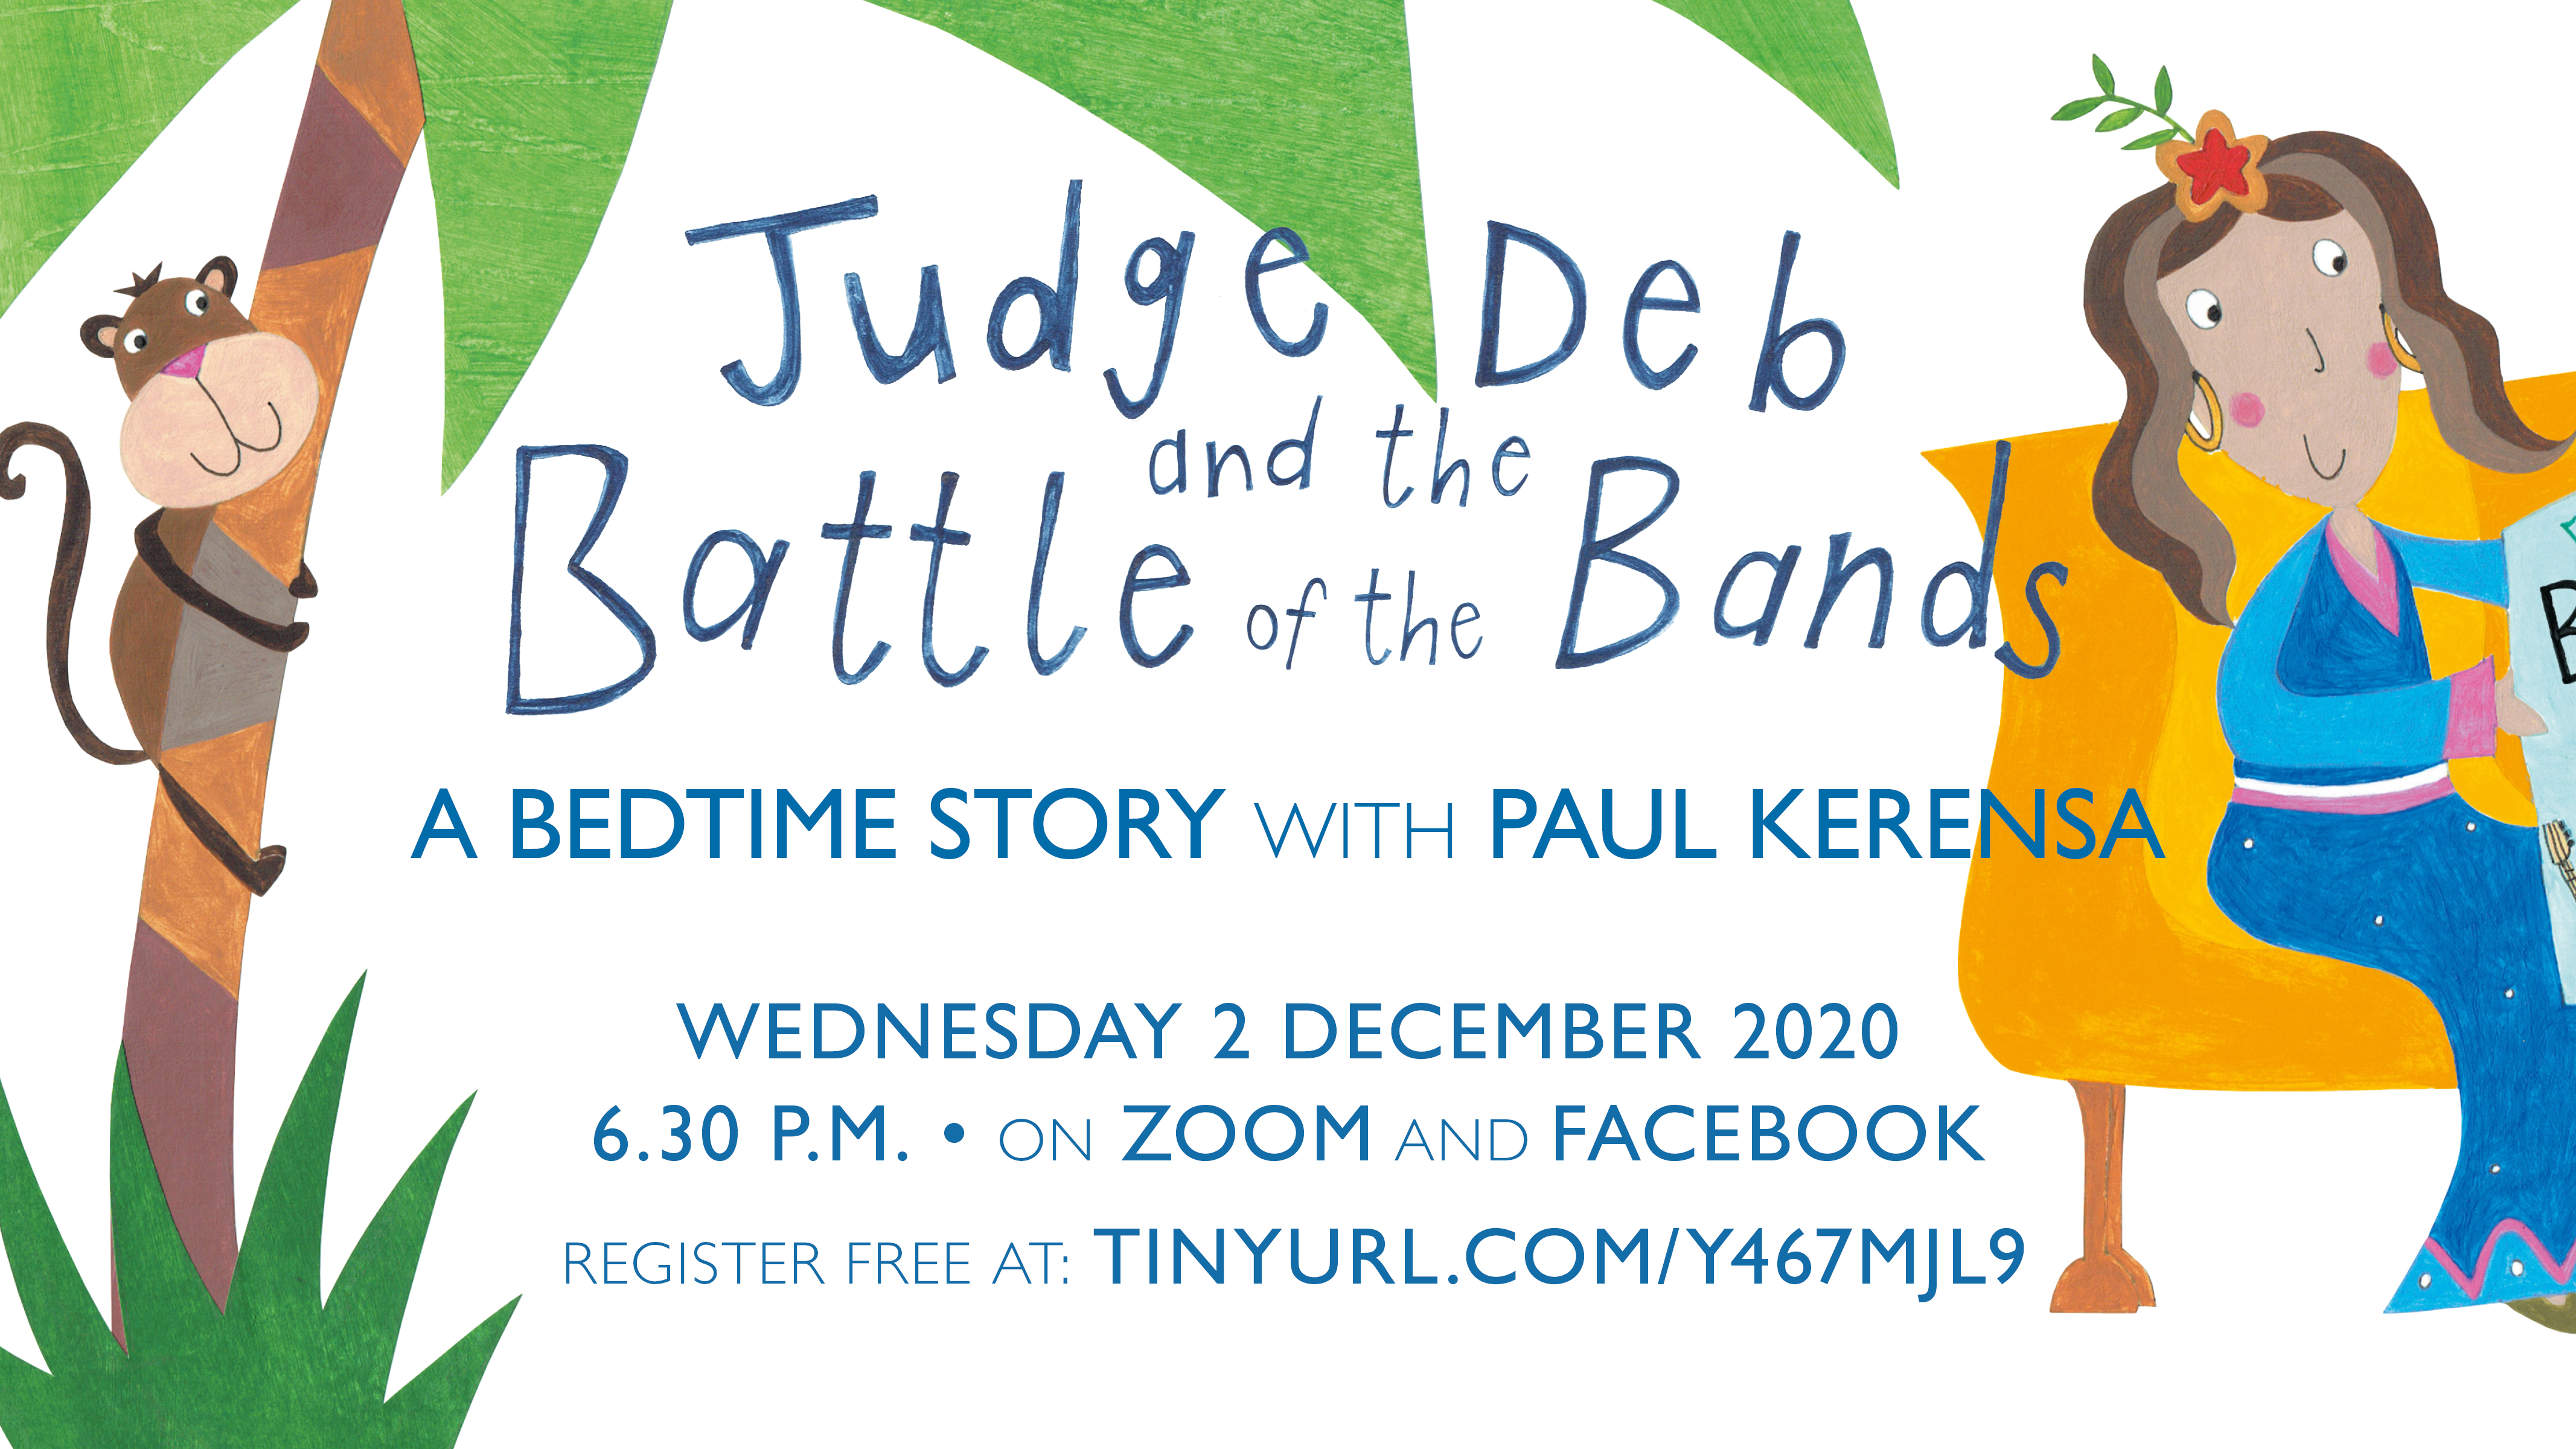  Judge Deb and the Battle of the Bands: A Bedtime Story with Paul Kerensa